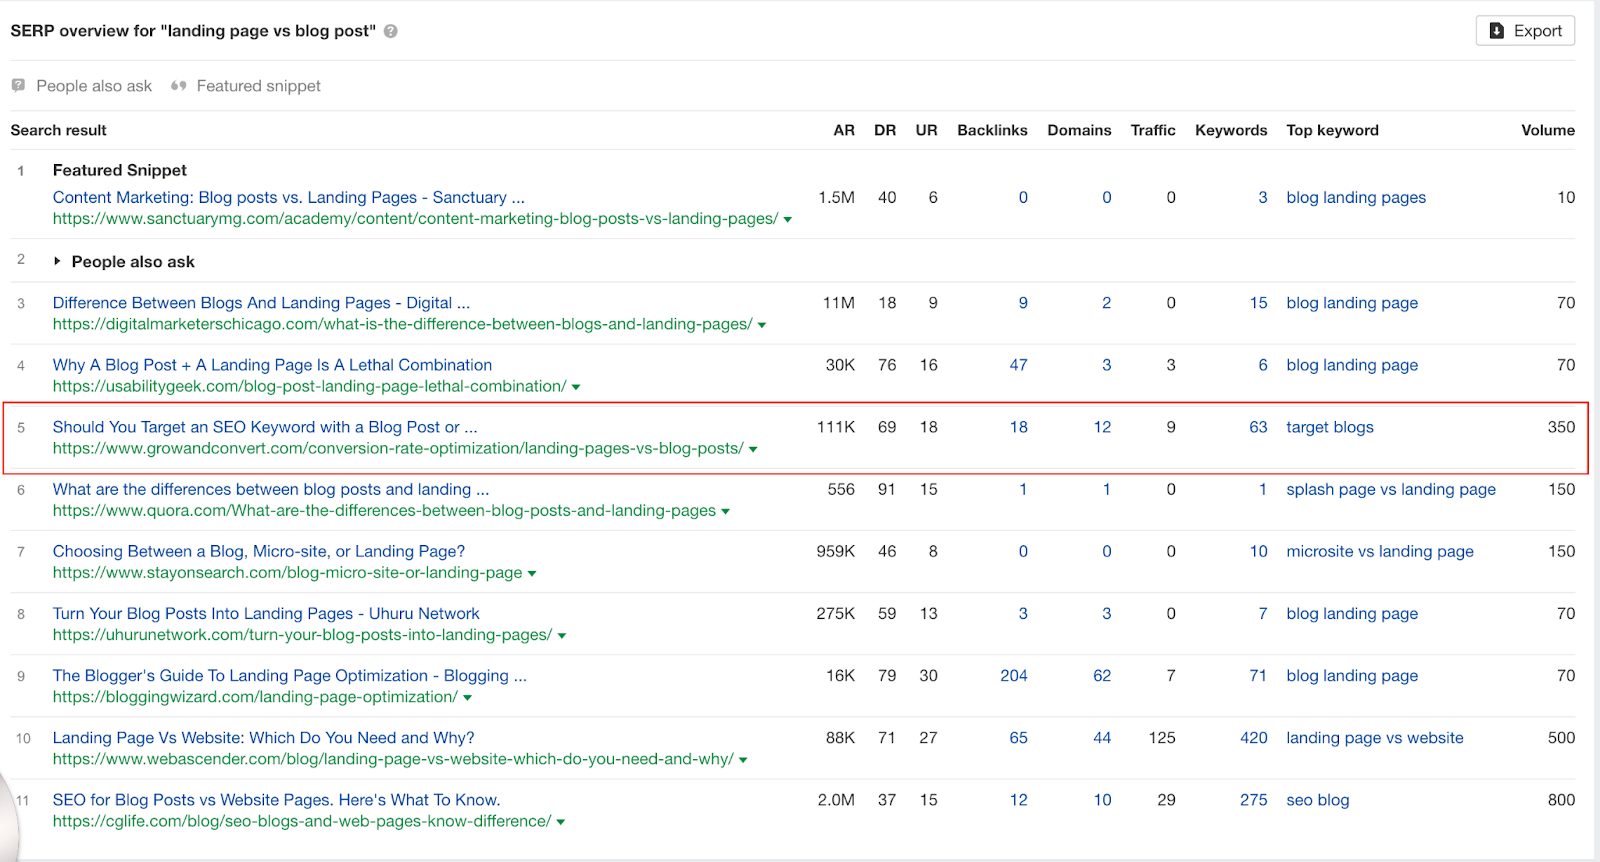 SERP Overview for "Landing Page vs Blog Post"